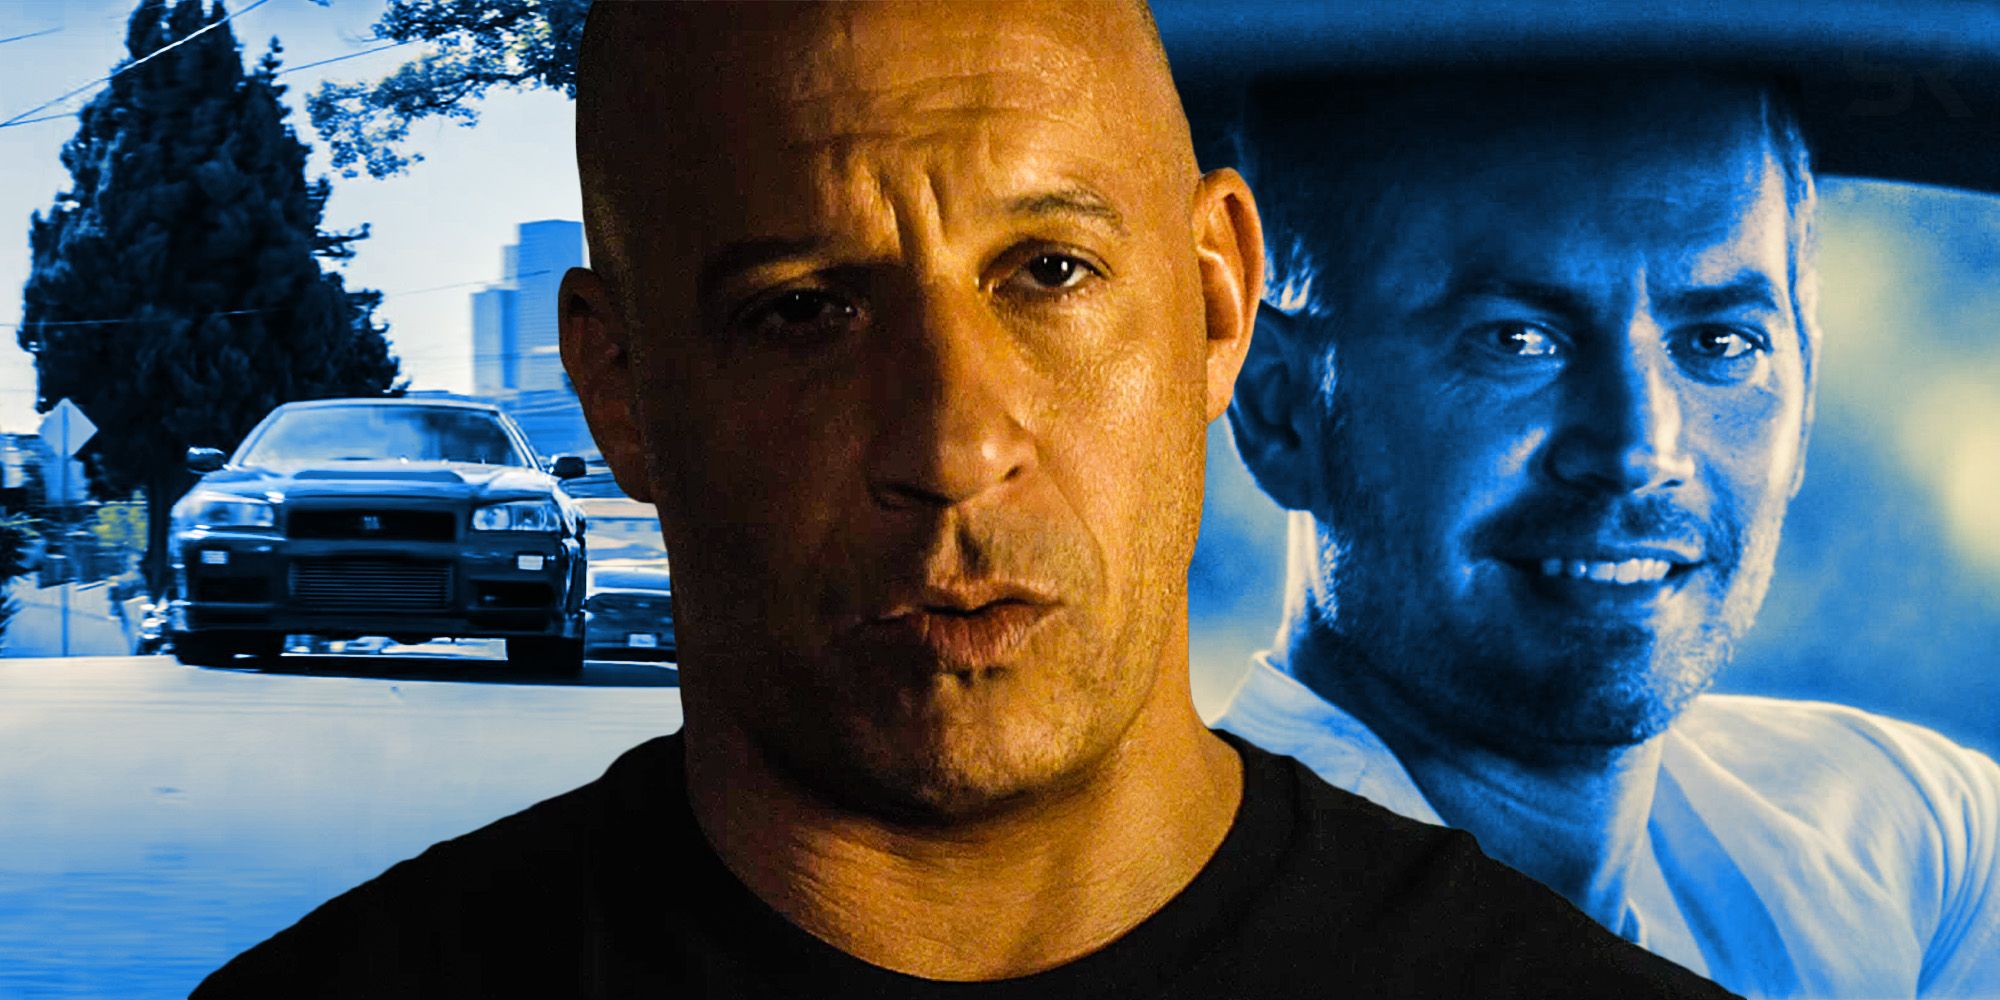 Vin Diesel Dom Fast and furious 9 Brian Oconner Blue car at the end